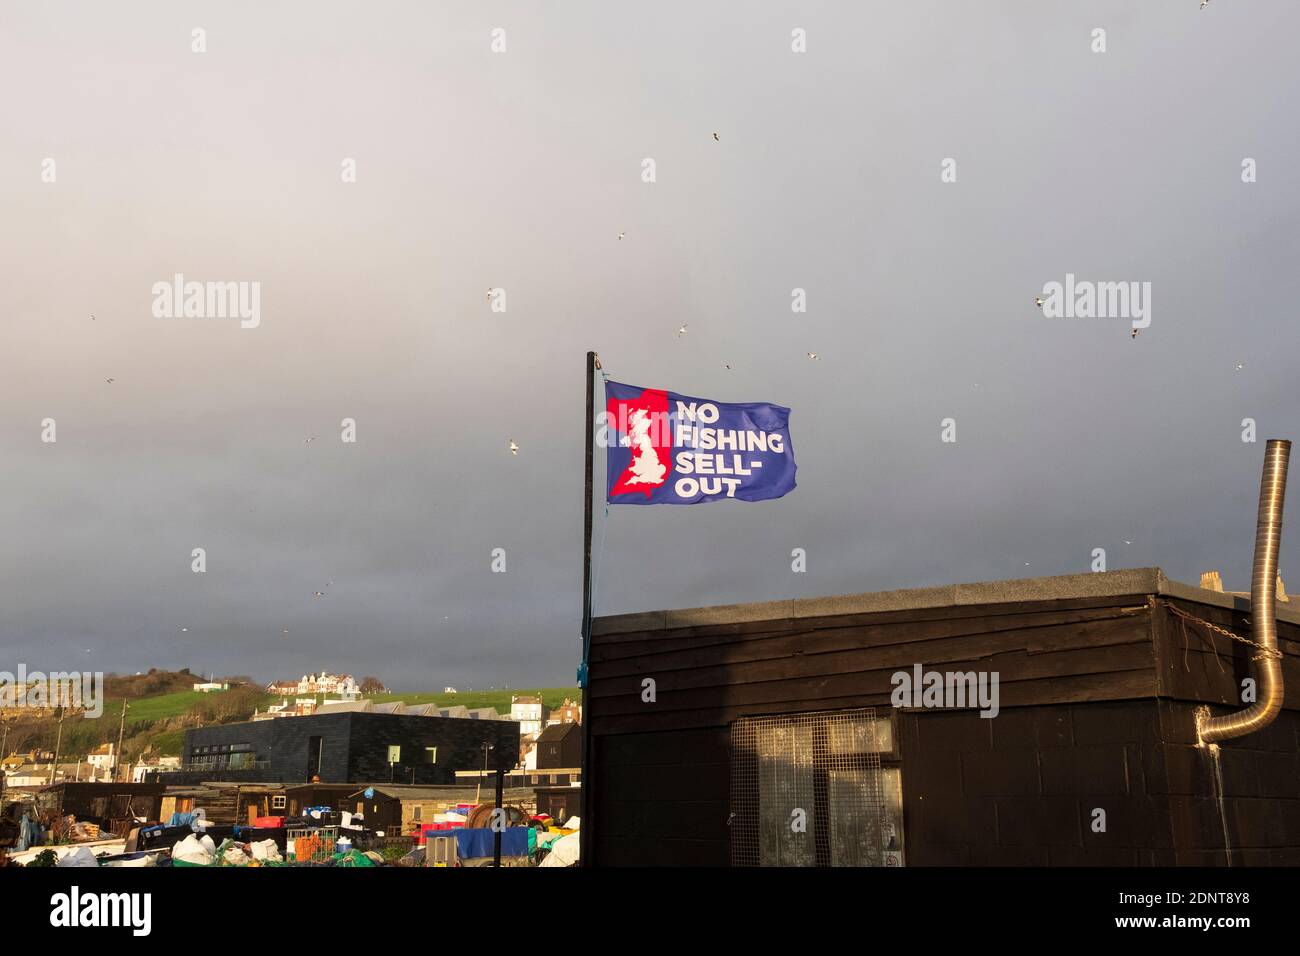 Hastings, East Sussex, UK. 18th December 2020. Dark clouds gather over the fishing boat beach, as fishing rights are still a sticking point in the EU/Brexit negotiations. C.Clarke/Alamy Live News Stock Photo